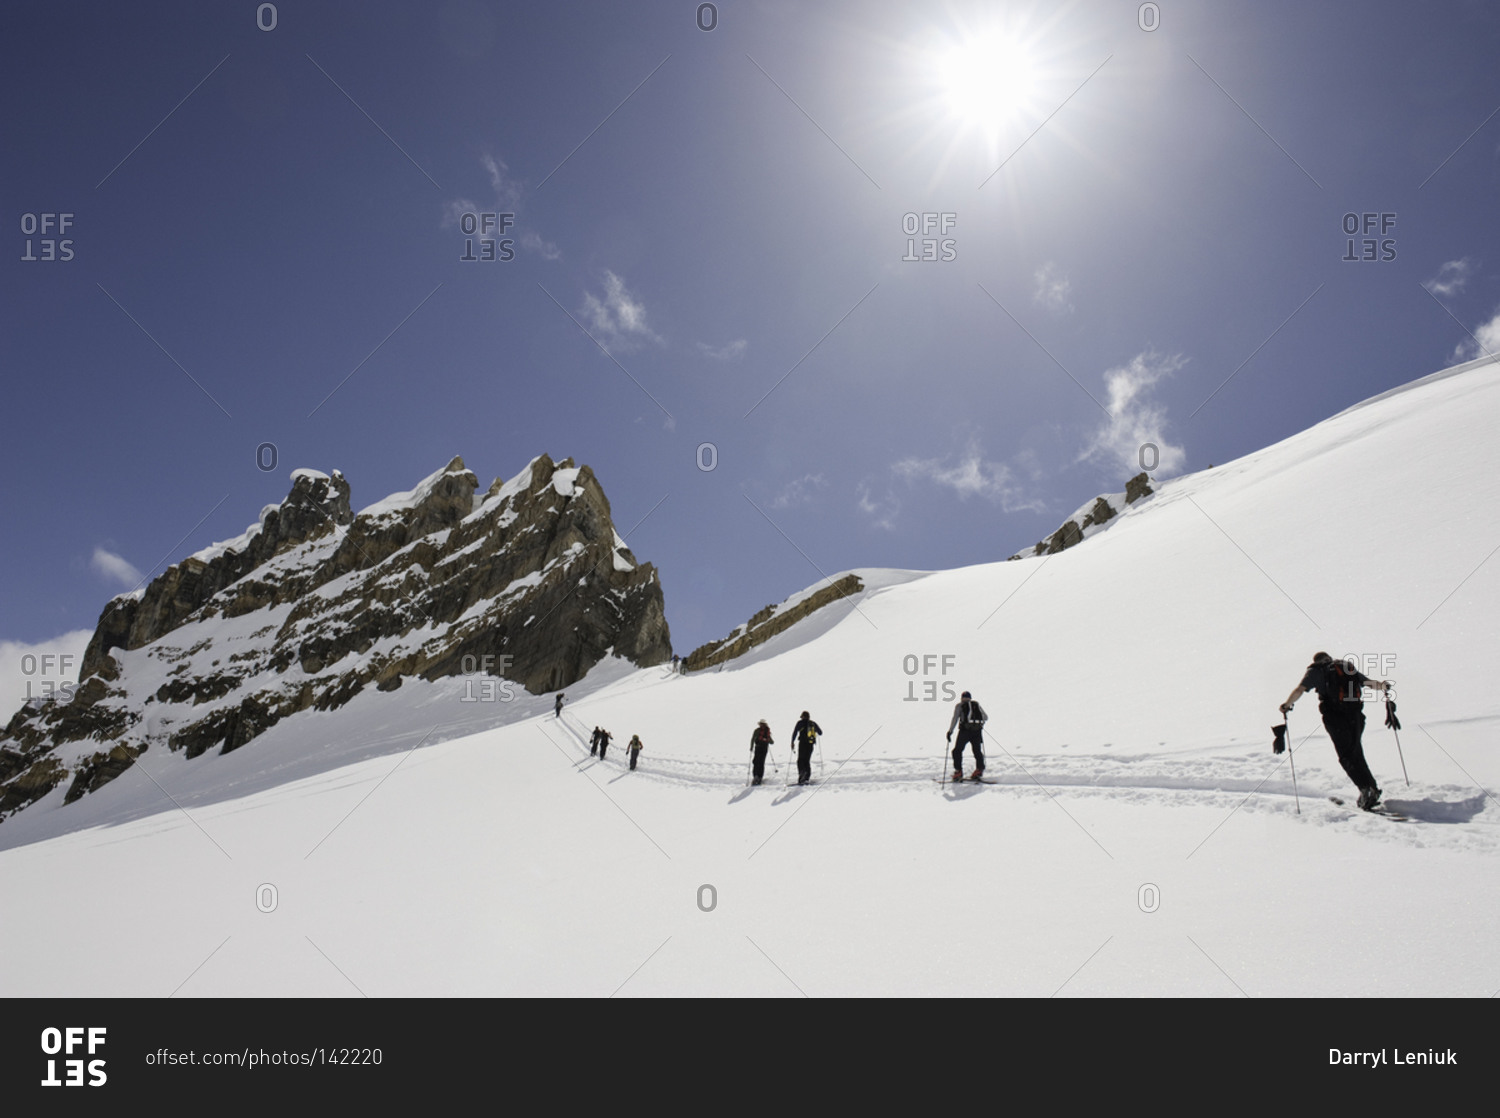 Low angle view of people cross-country skiing